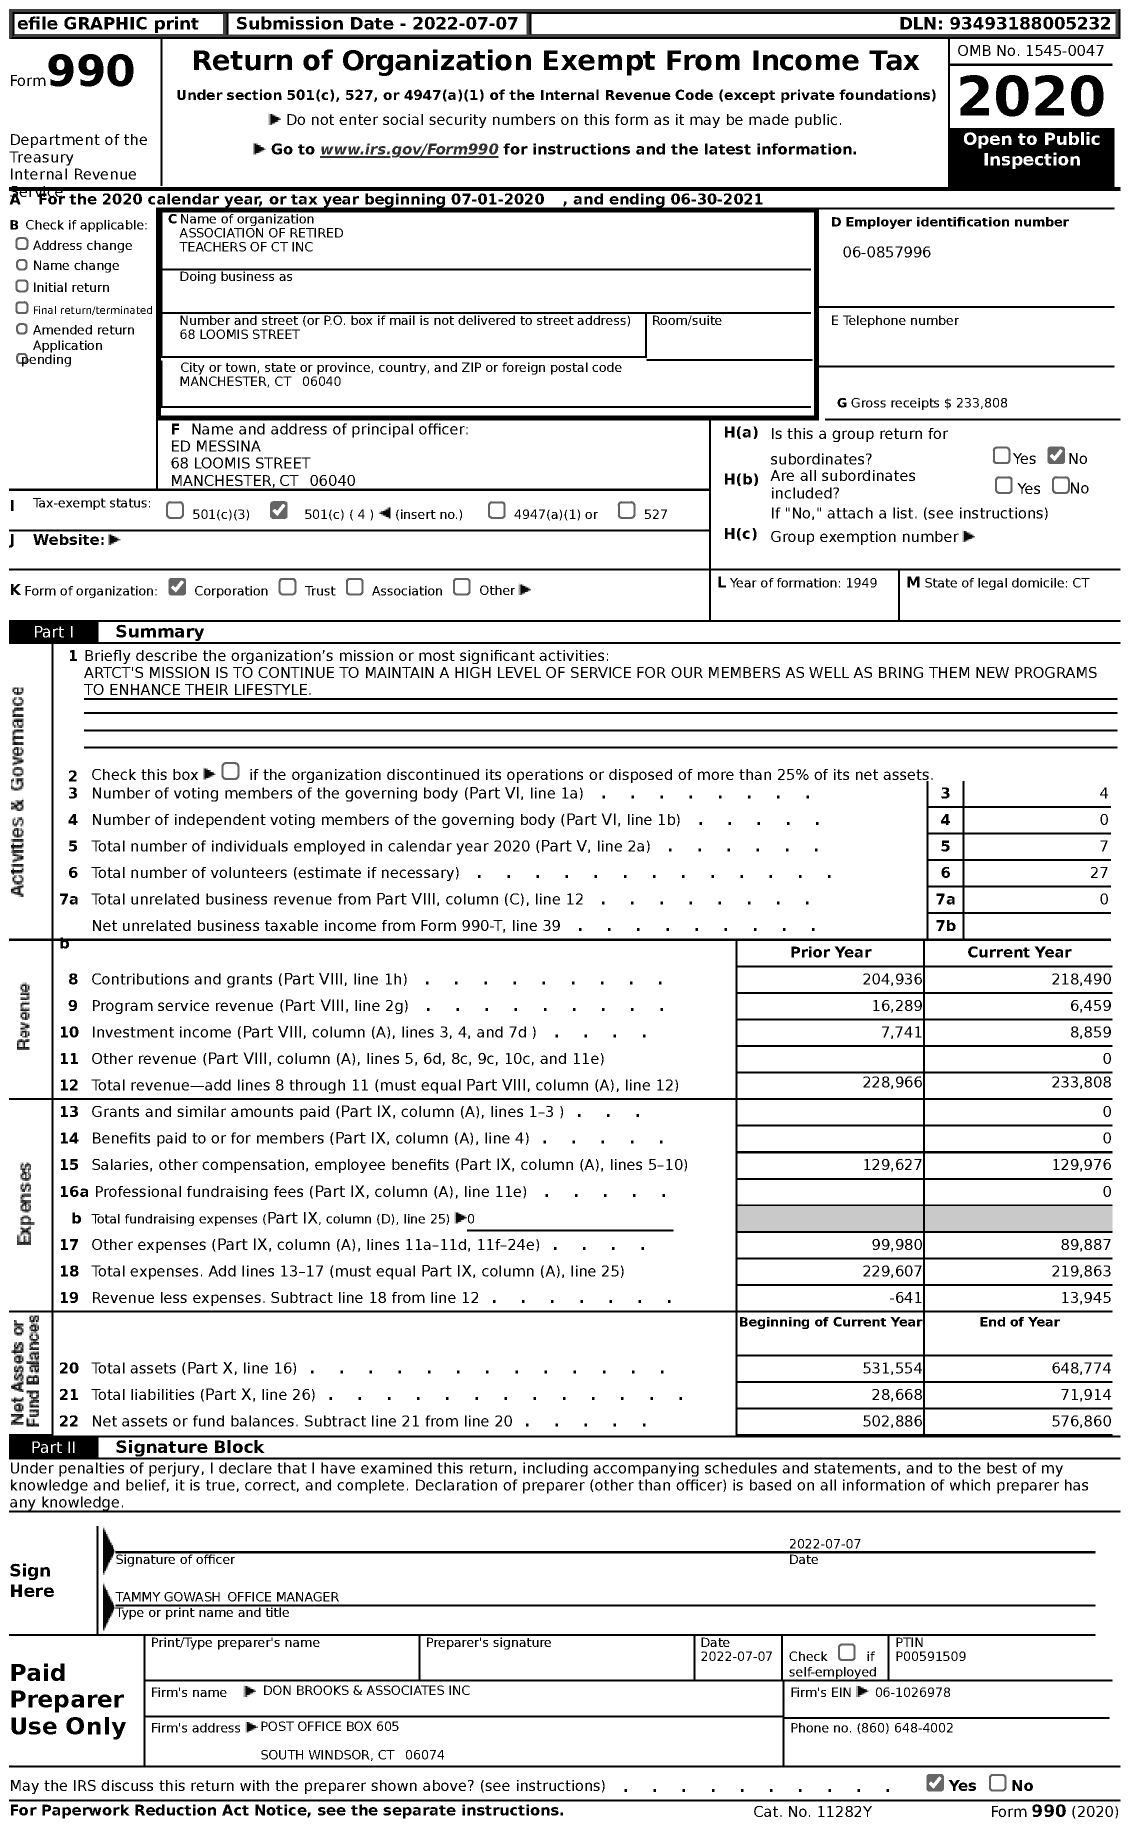 Image of first page of 2020 Form 990 for Association of Retired Teachers of CT